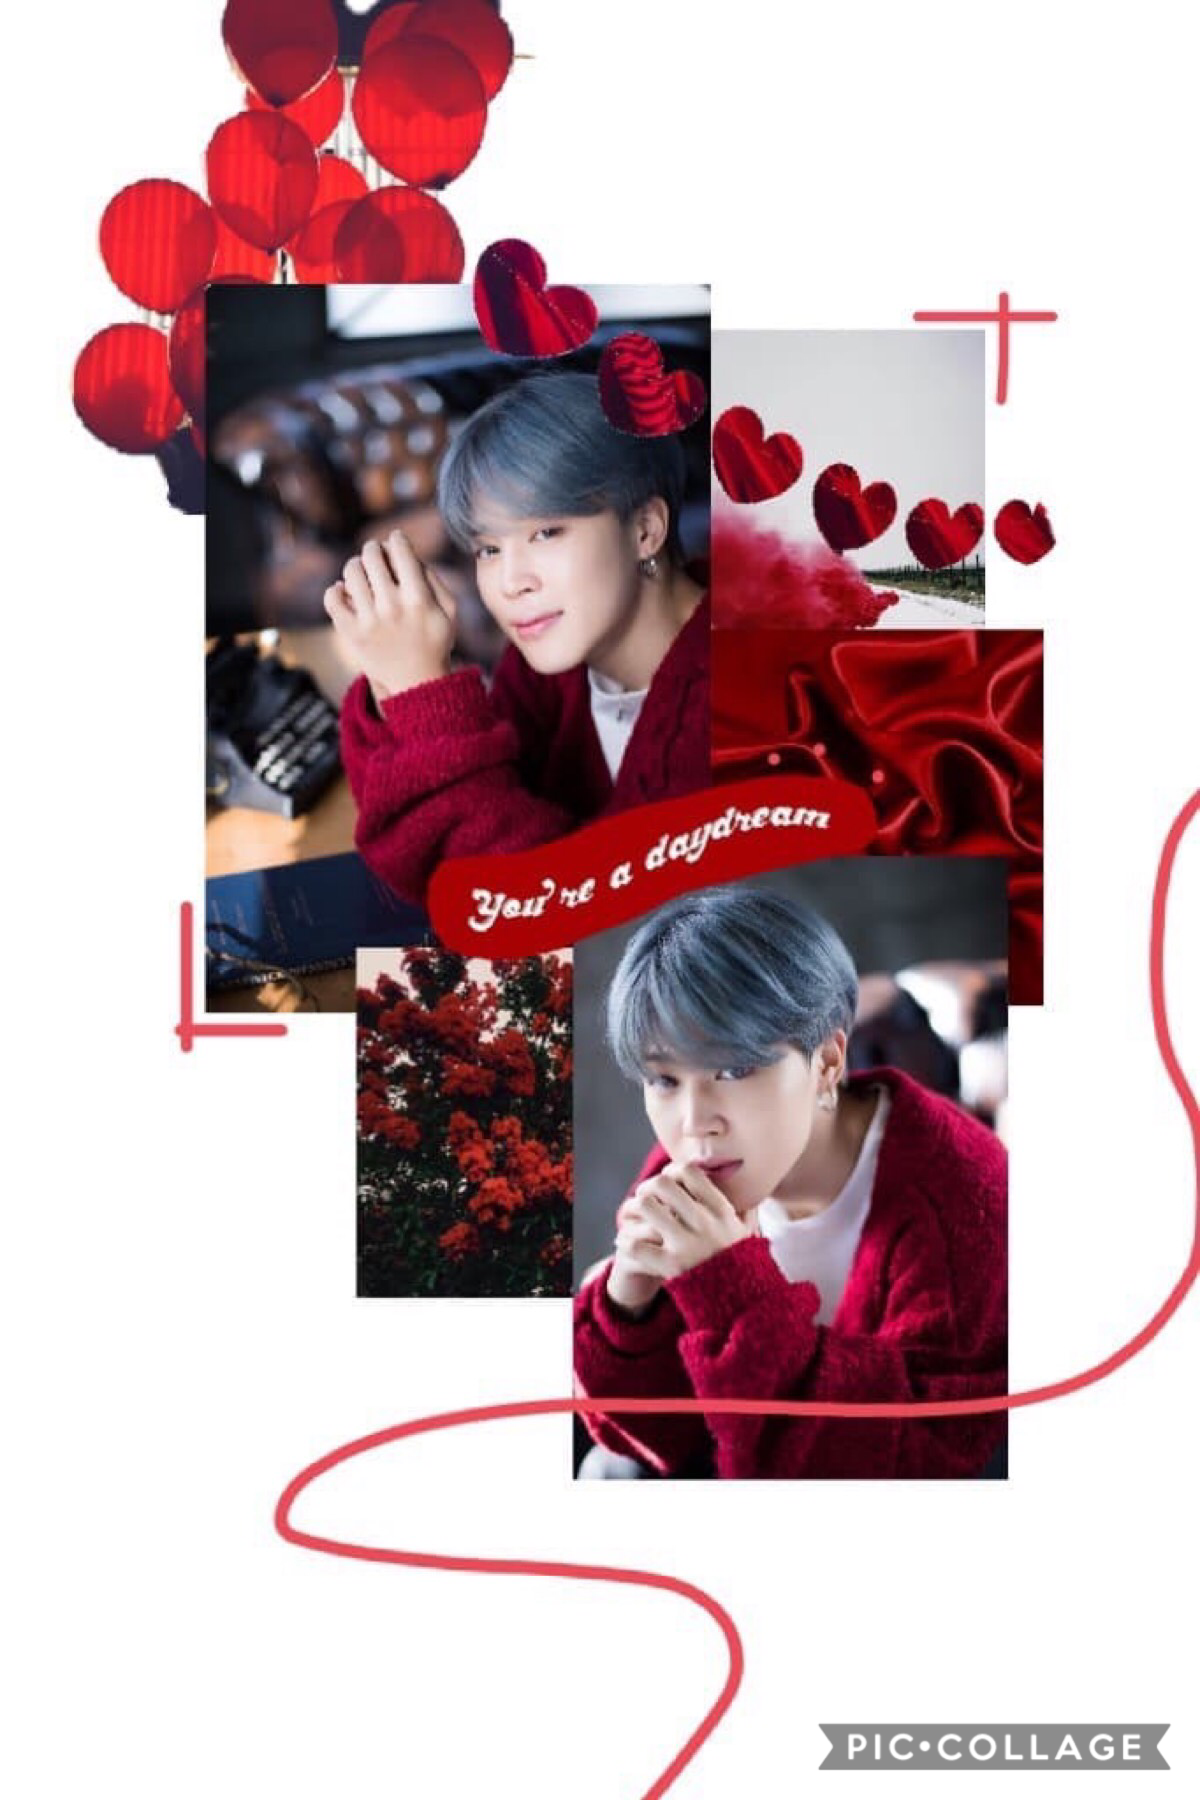 ♥️ tap ♥️

Heyyy ANOTHER Jimin collage because HE’S SO CUTE FOR CRYING OUT LOUD

This was inspired by someone but I can’t remember their username or if they were even on Piccollage 😖

anyway qotd: favourite season?
aotd: winter because I like the cold 😅⛄️